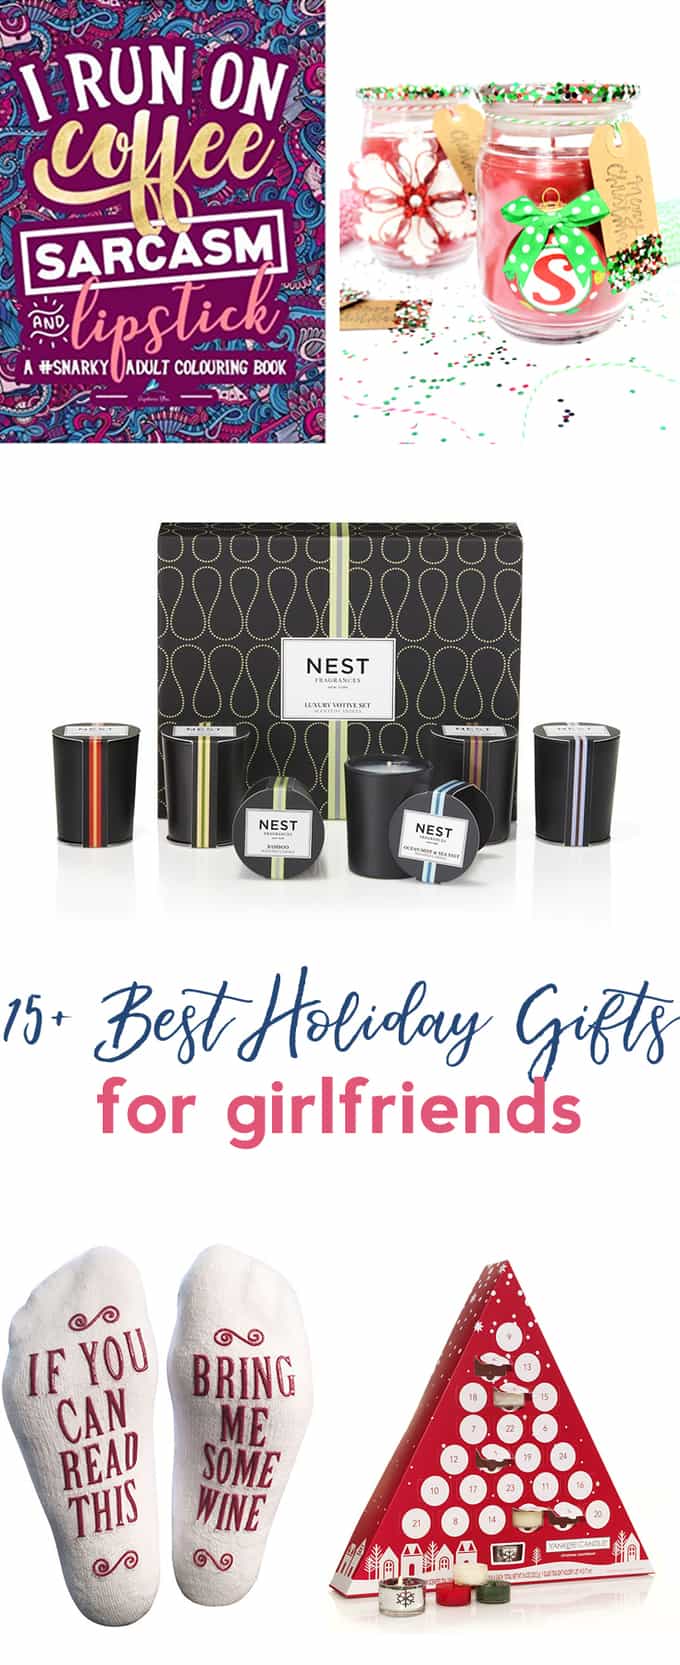 7 Best Gift for Girlfriend on Her Birthday | IndiaGift